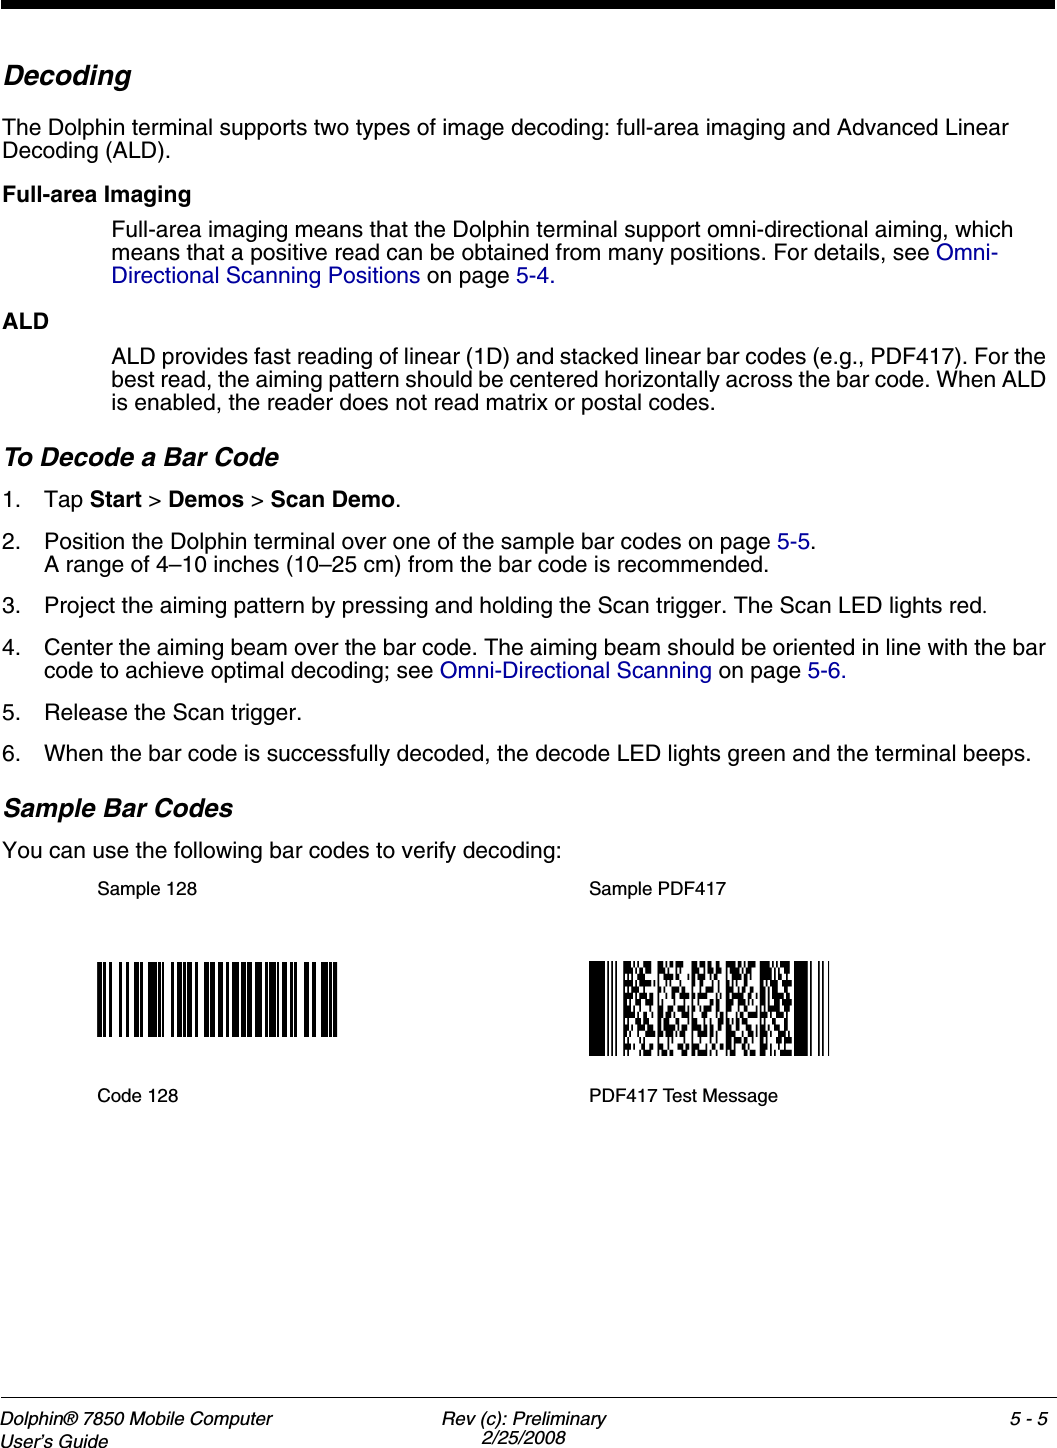 Dolphin® 7850 Mobile Computer  User’s Guide Rev (c): Preliminary2/25/20085 - 5DecodingThe Dolphin terminal supports two types of image decoding: full-area imaging and Advanced Linear Decoding (ALD).Full-area ImagingFull-area imaging means that the Dolphin terminal support omni-directional aiming, which means that a positive read can be obtained from many positions. For details, see Omni-Directional Scanning Positions on page 5-4. ALDALD provides fast reading of linear (1D) and stacked linear bar codes (e.g., PDF417). For the best read, the aiming pattern should be centered horizontally across the bar code. When ALD is enabled, the reader does not read matrix or postal codes.To Decode a Bar Code1. Tap Start &gt; Demos &gt; Scan Demo.2. Position the Dolphin terminal over one of the sample bar codes on page 5-5.A range of 4–10 inches (10–25 cm) from the bar code is recommended. 3. Project the aiming pattern by pressing and holding the Scan trigger. The Scan LED lights red.4. Center the aiming beam over the bar code. The aiming beam should be oriented in line with the bar code to achieve optimal decoding; see Omni-Directional Scanning on page 5-6.5. Release the Scan trigger.6. When the bar code is successfully decoded, the decode LED lights green and the terminal beeps.Sample Bar CodesYou can use the following bar codes to verify decoding:Sample 128 Sample PDF417Code 128 PDF417 Test Message